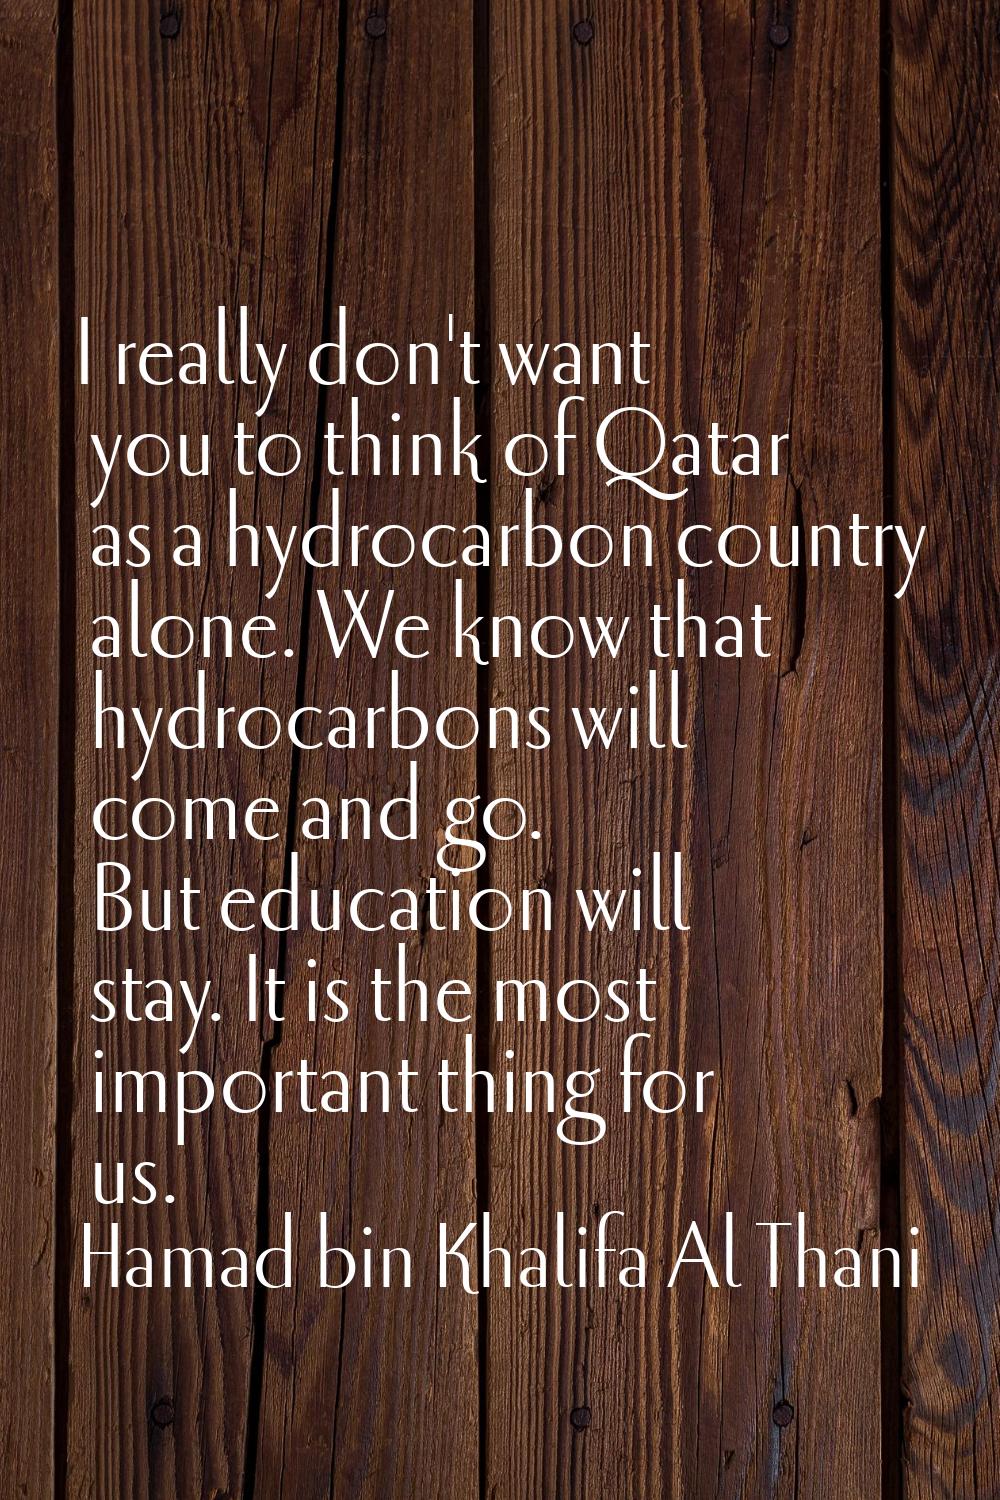 I really don't want you to think of Qatar as a hydrocarbon country alone. We know that hydrocarbons